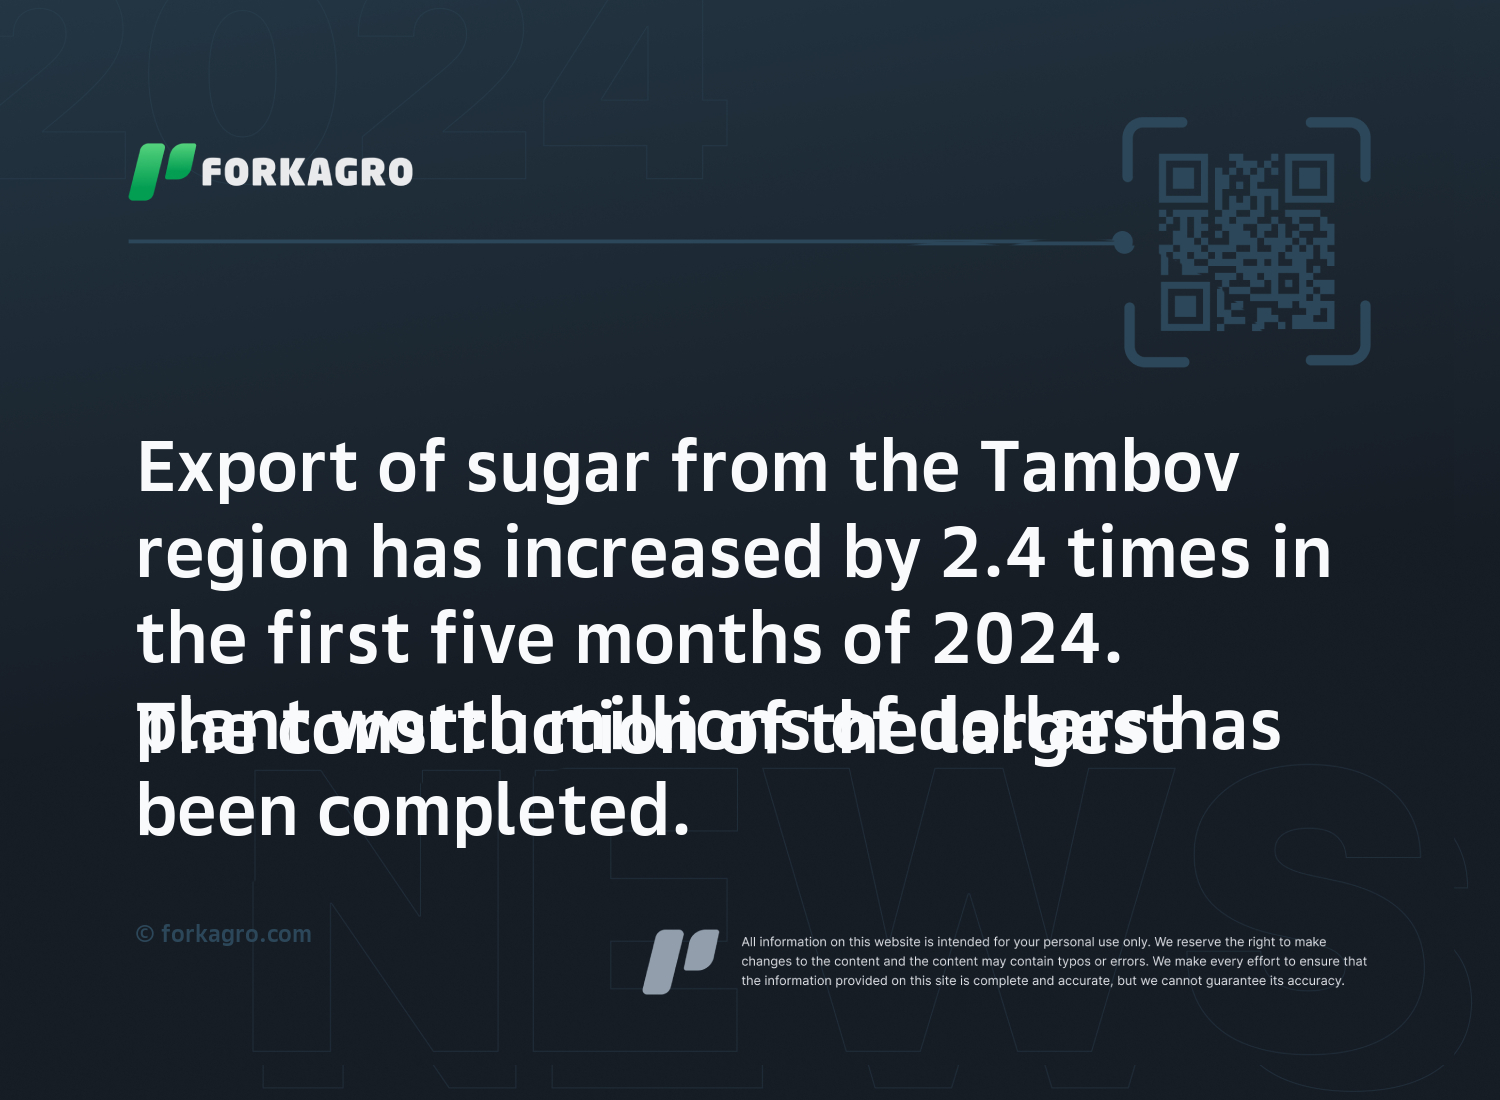 Export of sugar from the Tambov region has increased by 2.4 times in the first five months of 2024.
The construction of the largest plant worth millions of dollars has been completed.